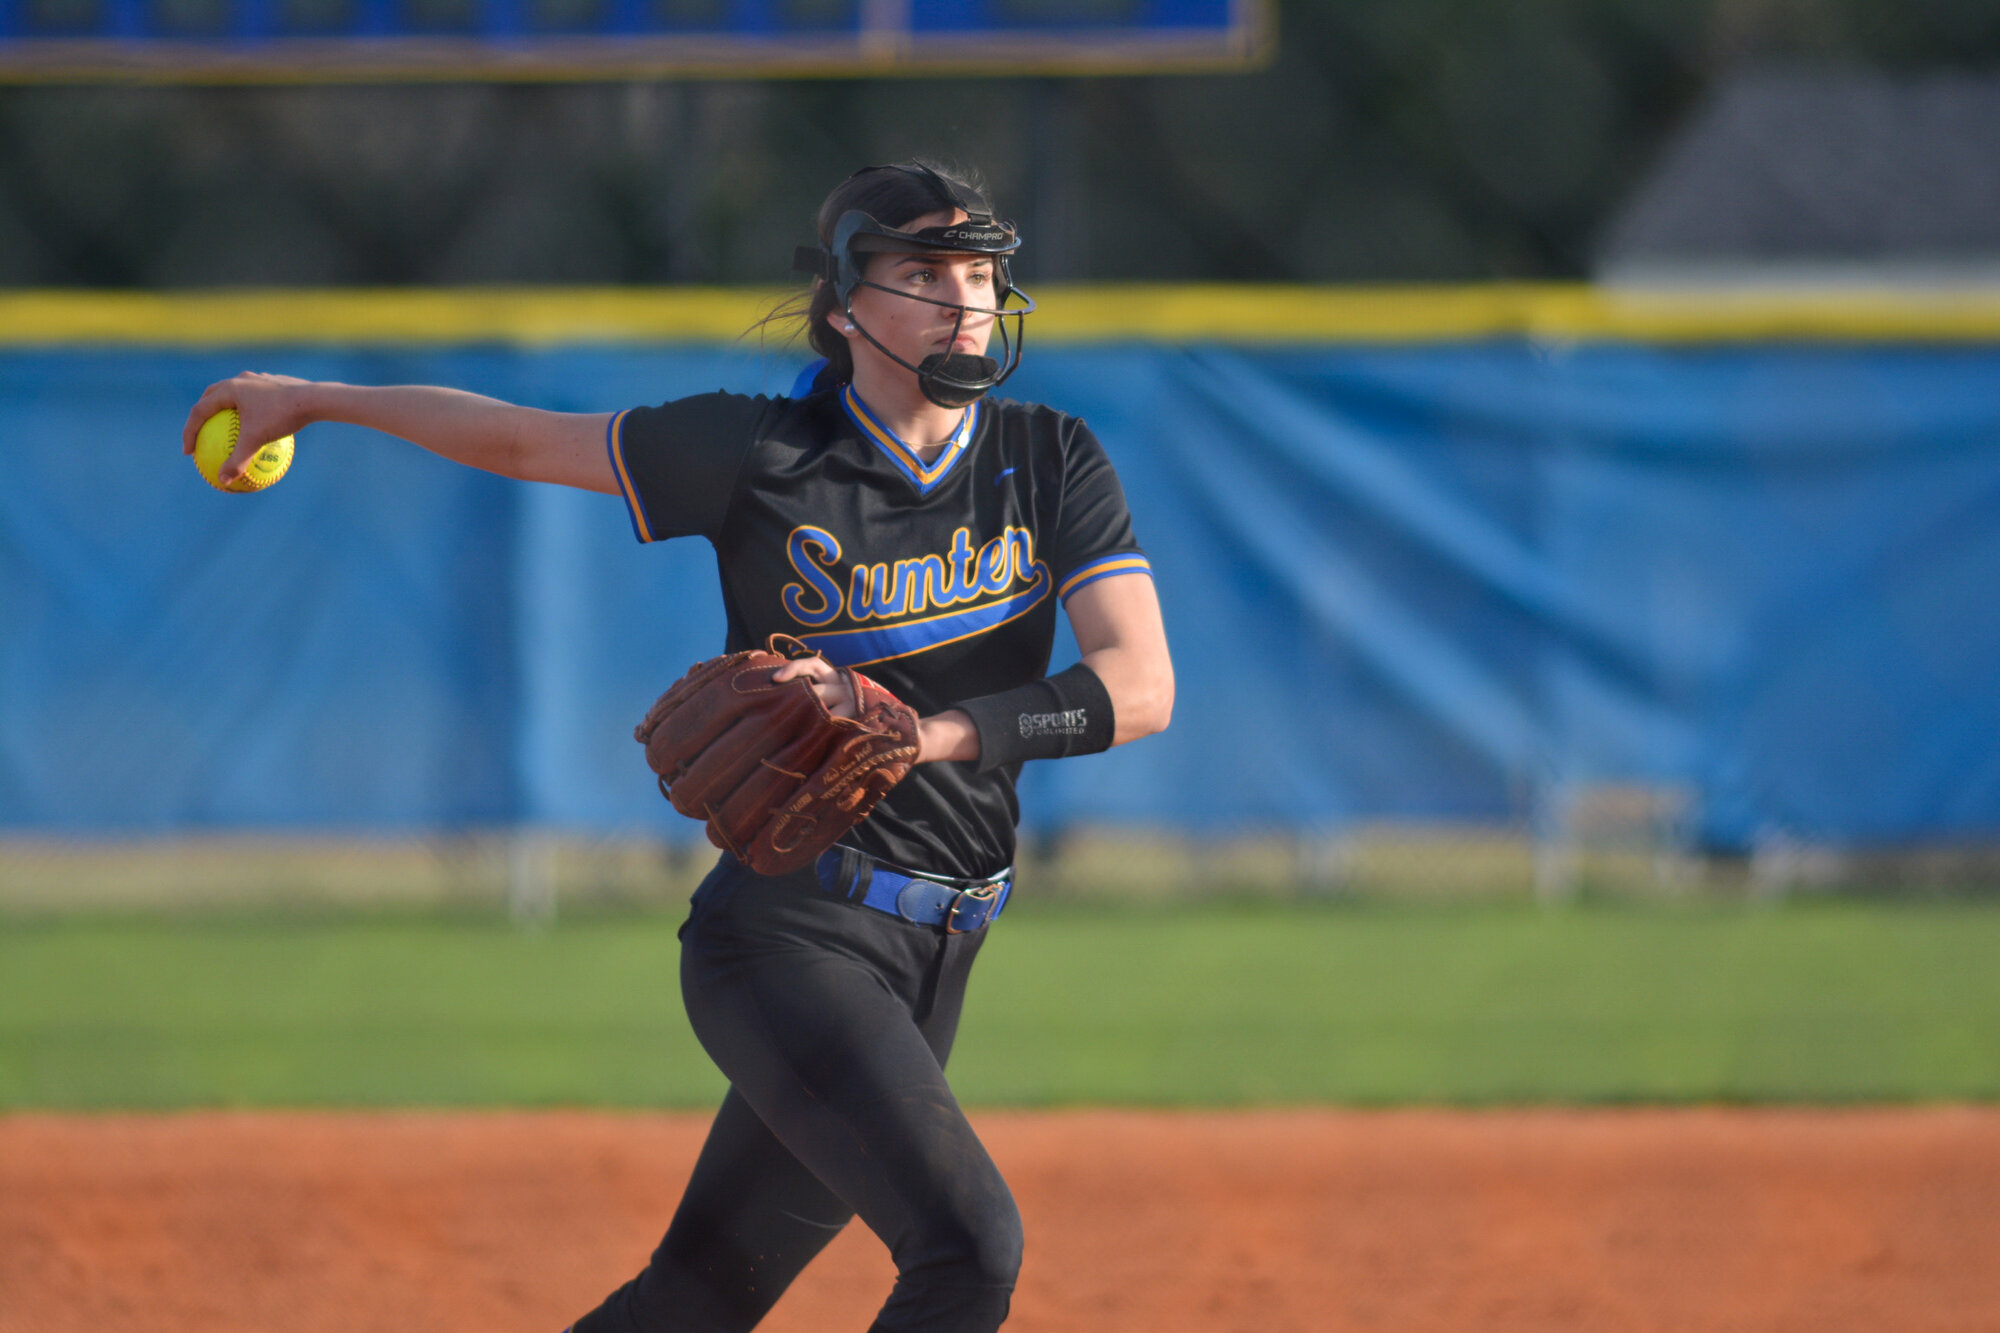 Sumter High's Lillie Ivey struck out 13 in a complete-game victory over Fort Dorchester on Wednesday to open the SCHSL 5A playoffs.